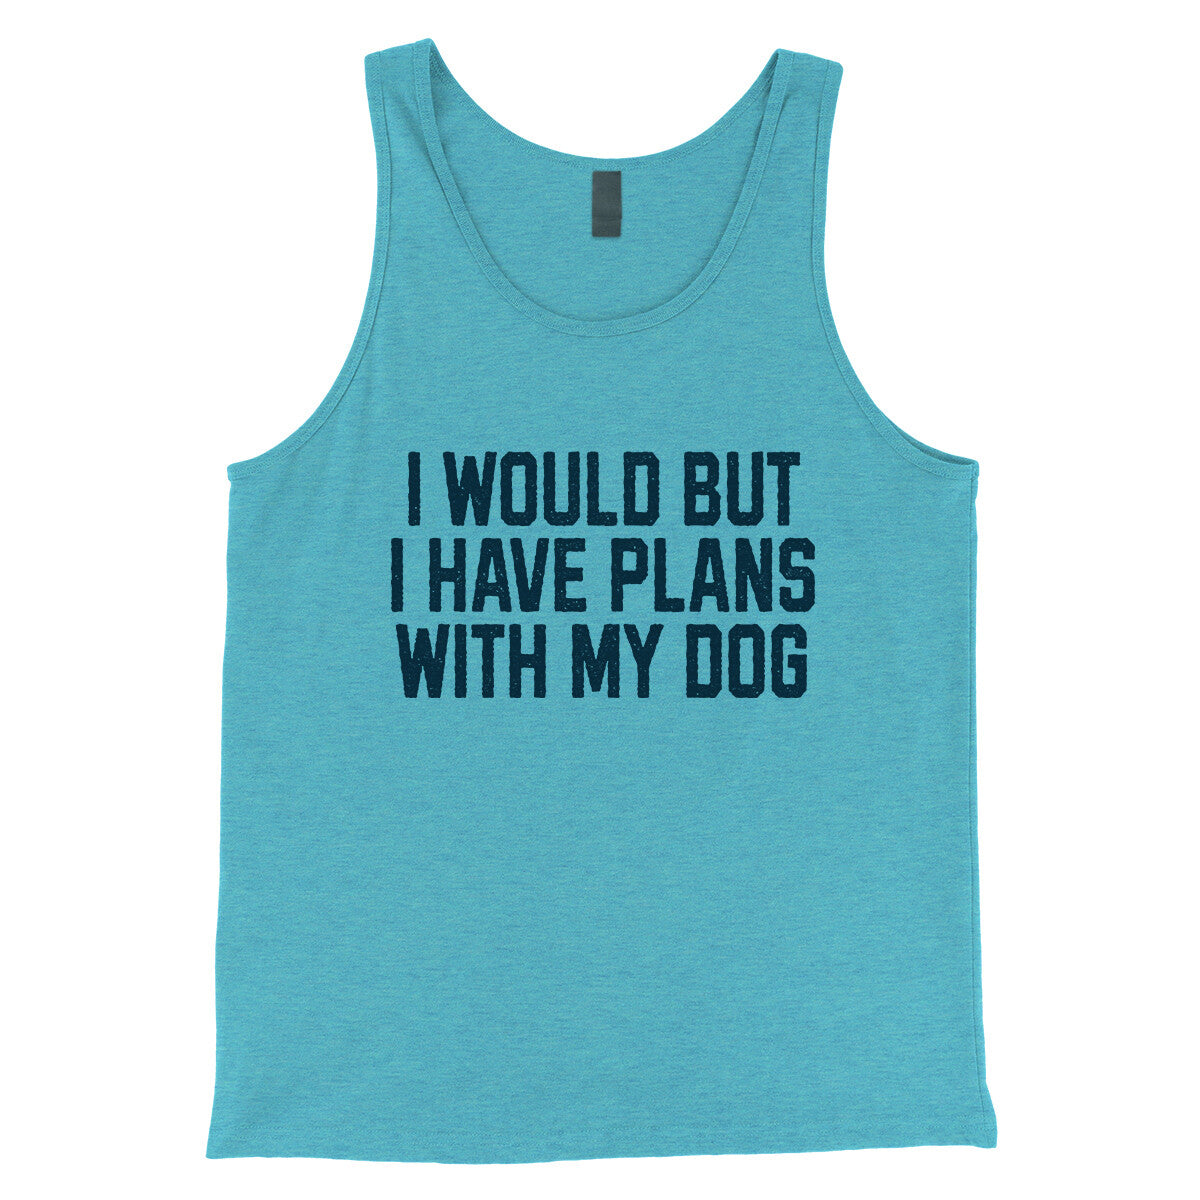 I Would but I Have Plans with My Dog in Aqua Triblend Color